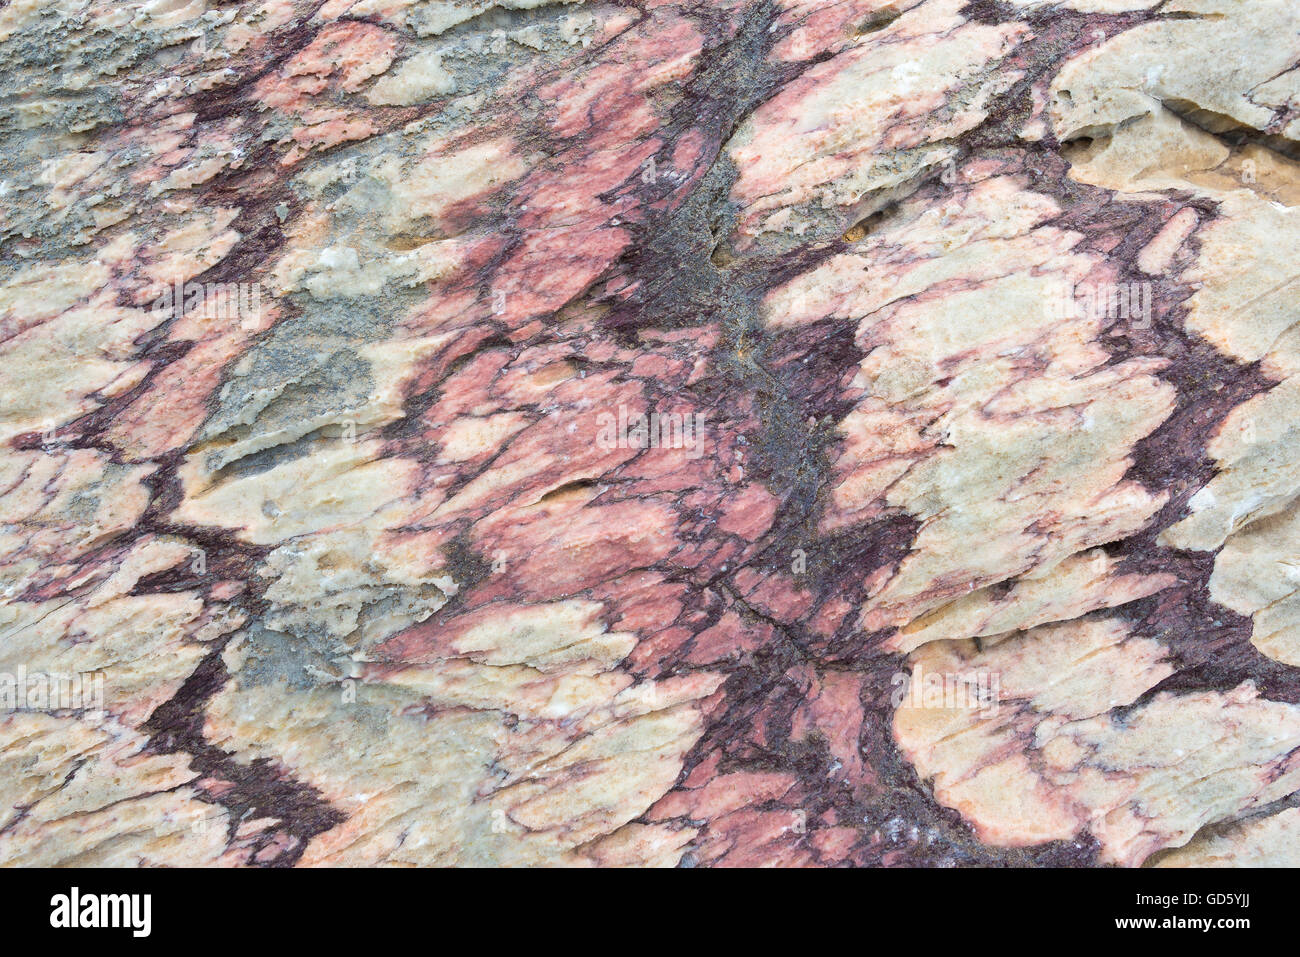 Close up of colorful rock surface, natural background, pattern and texture. Metamorphic white quartzite folded and fractured tog Stock Photo